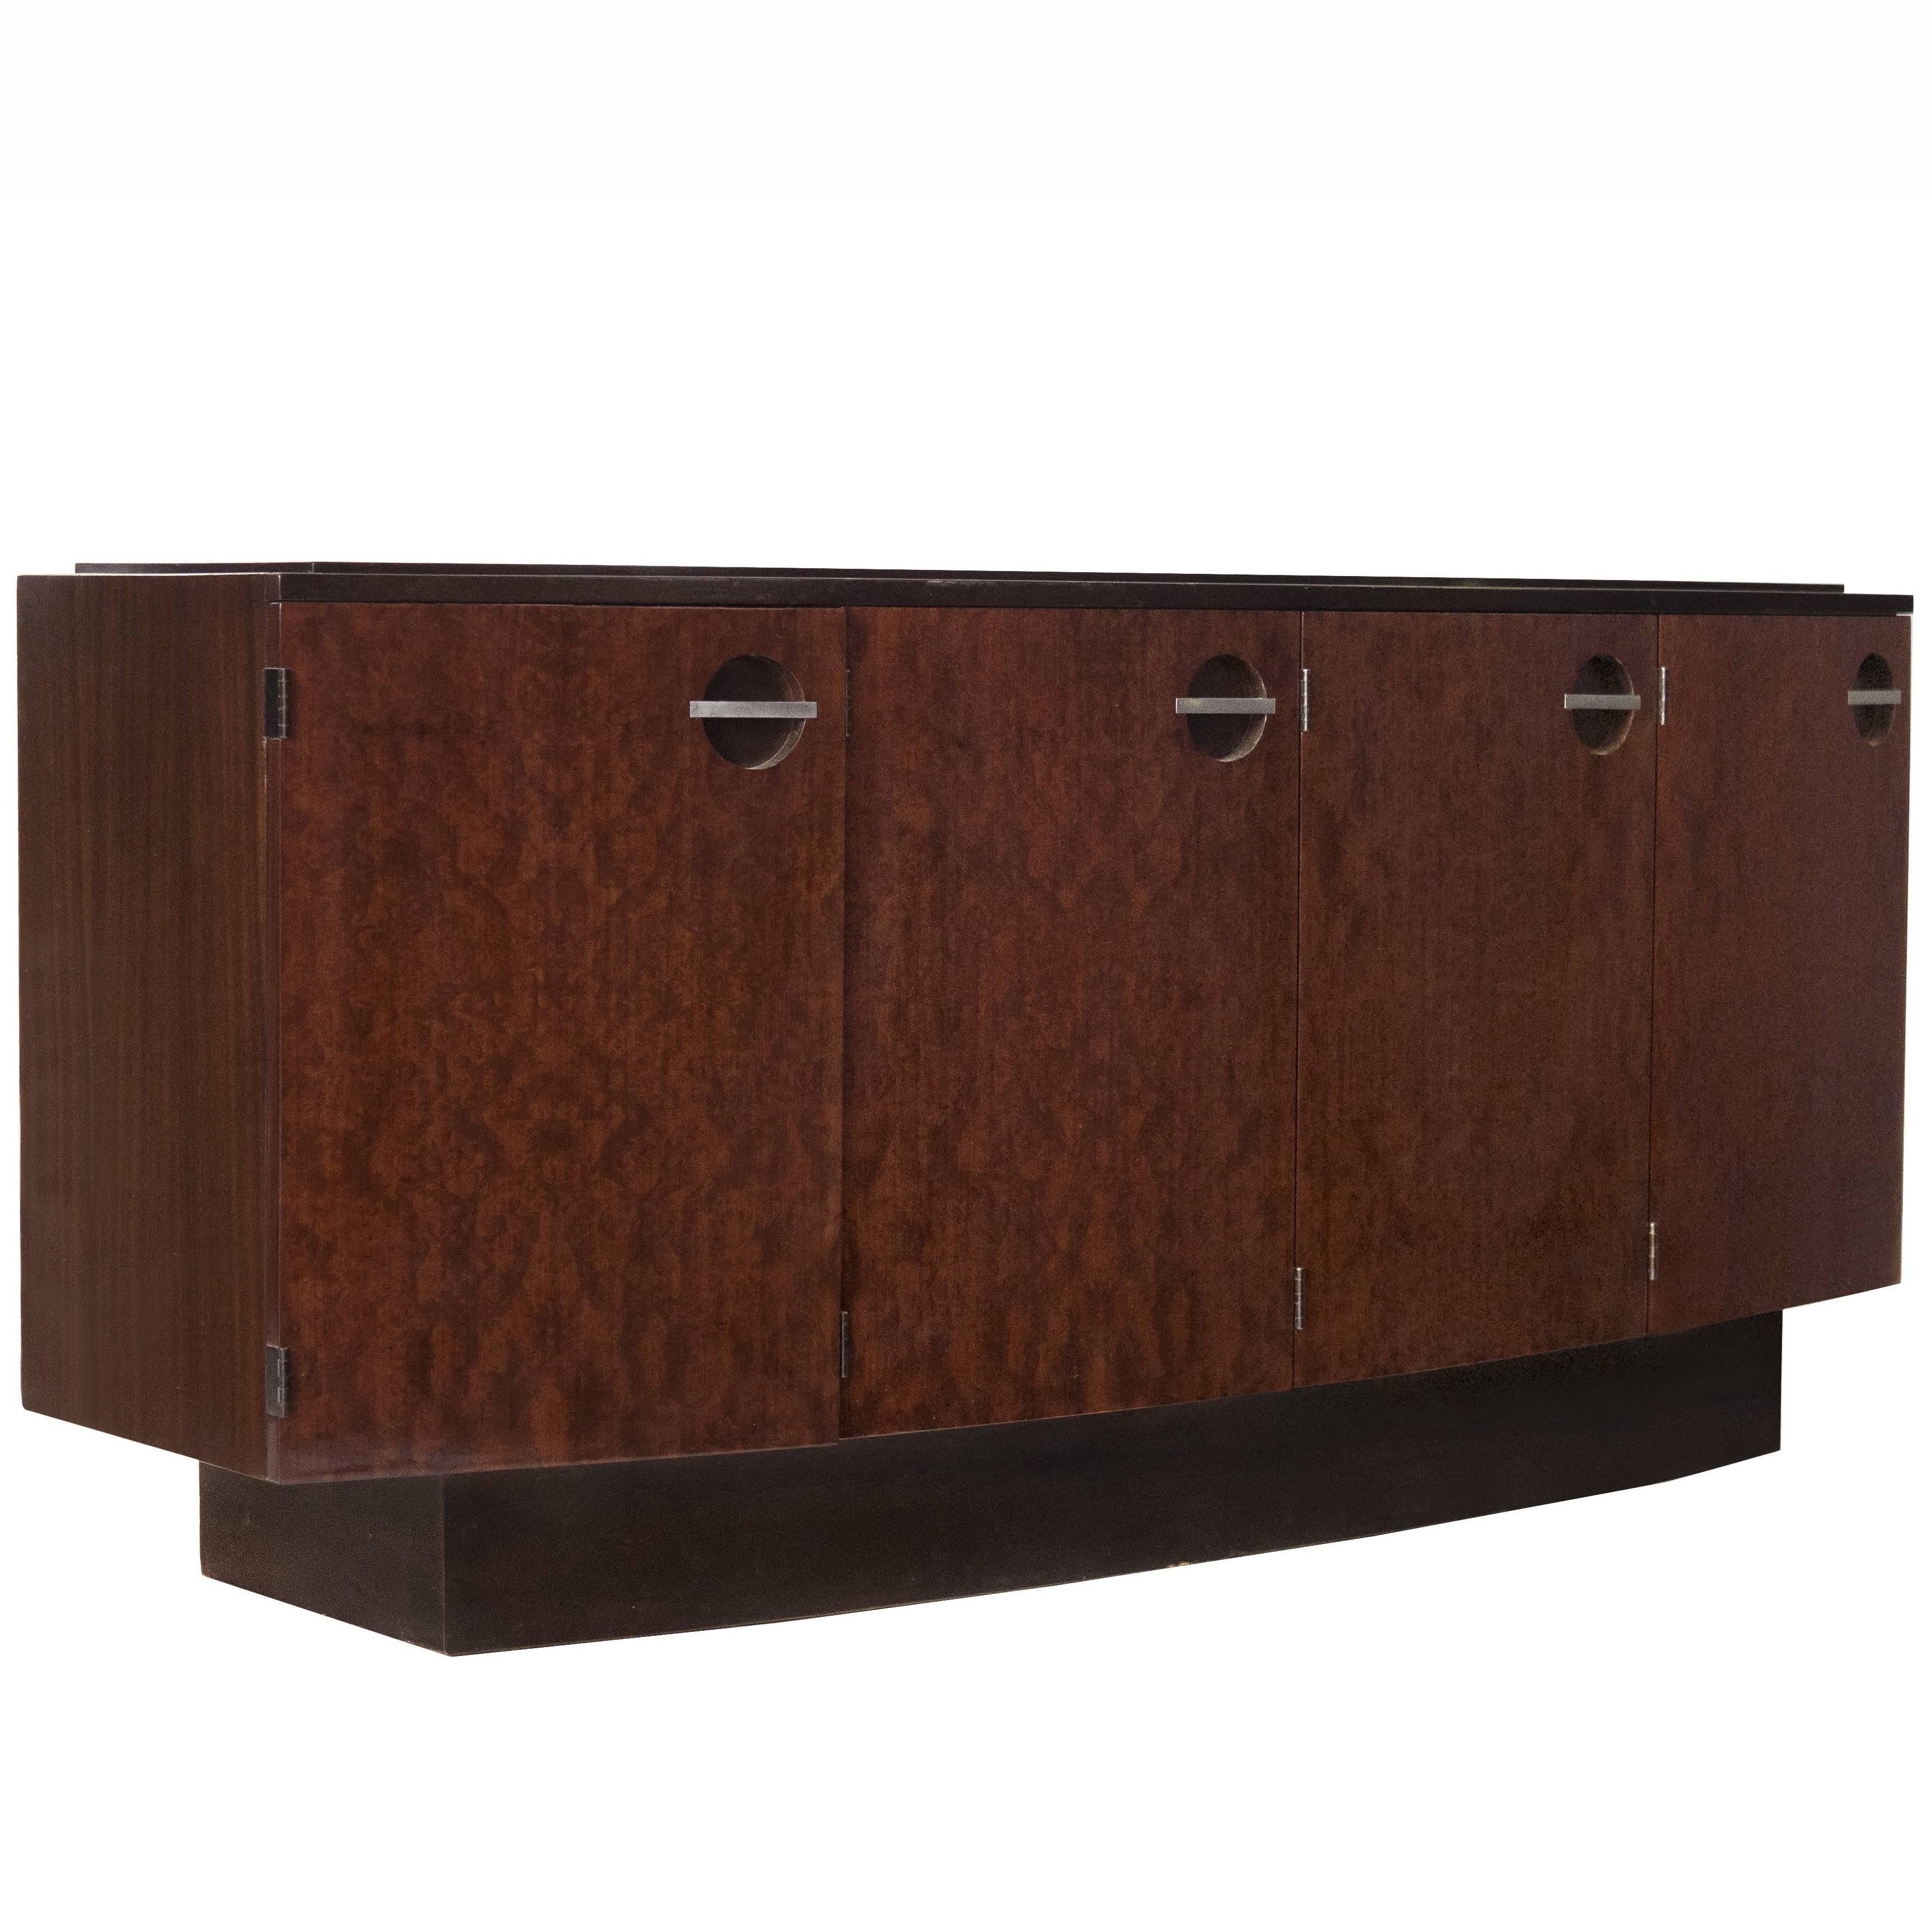 Gilbert Rohde Sideboard For Sale